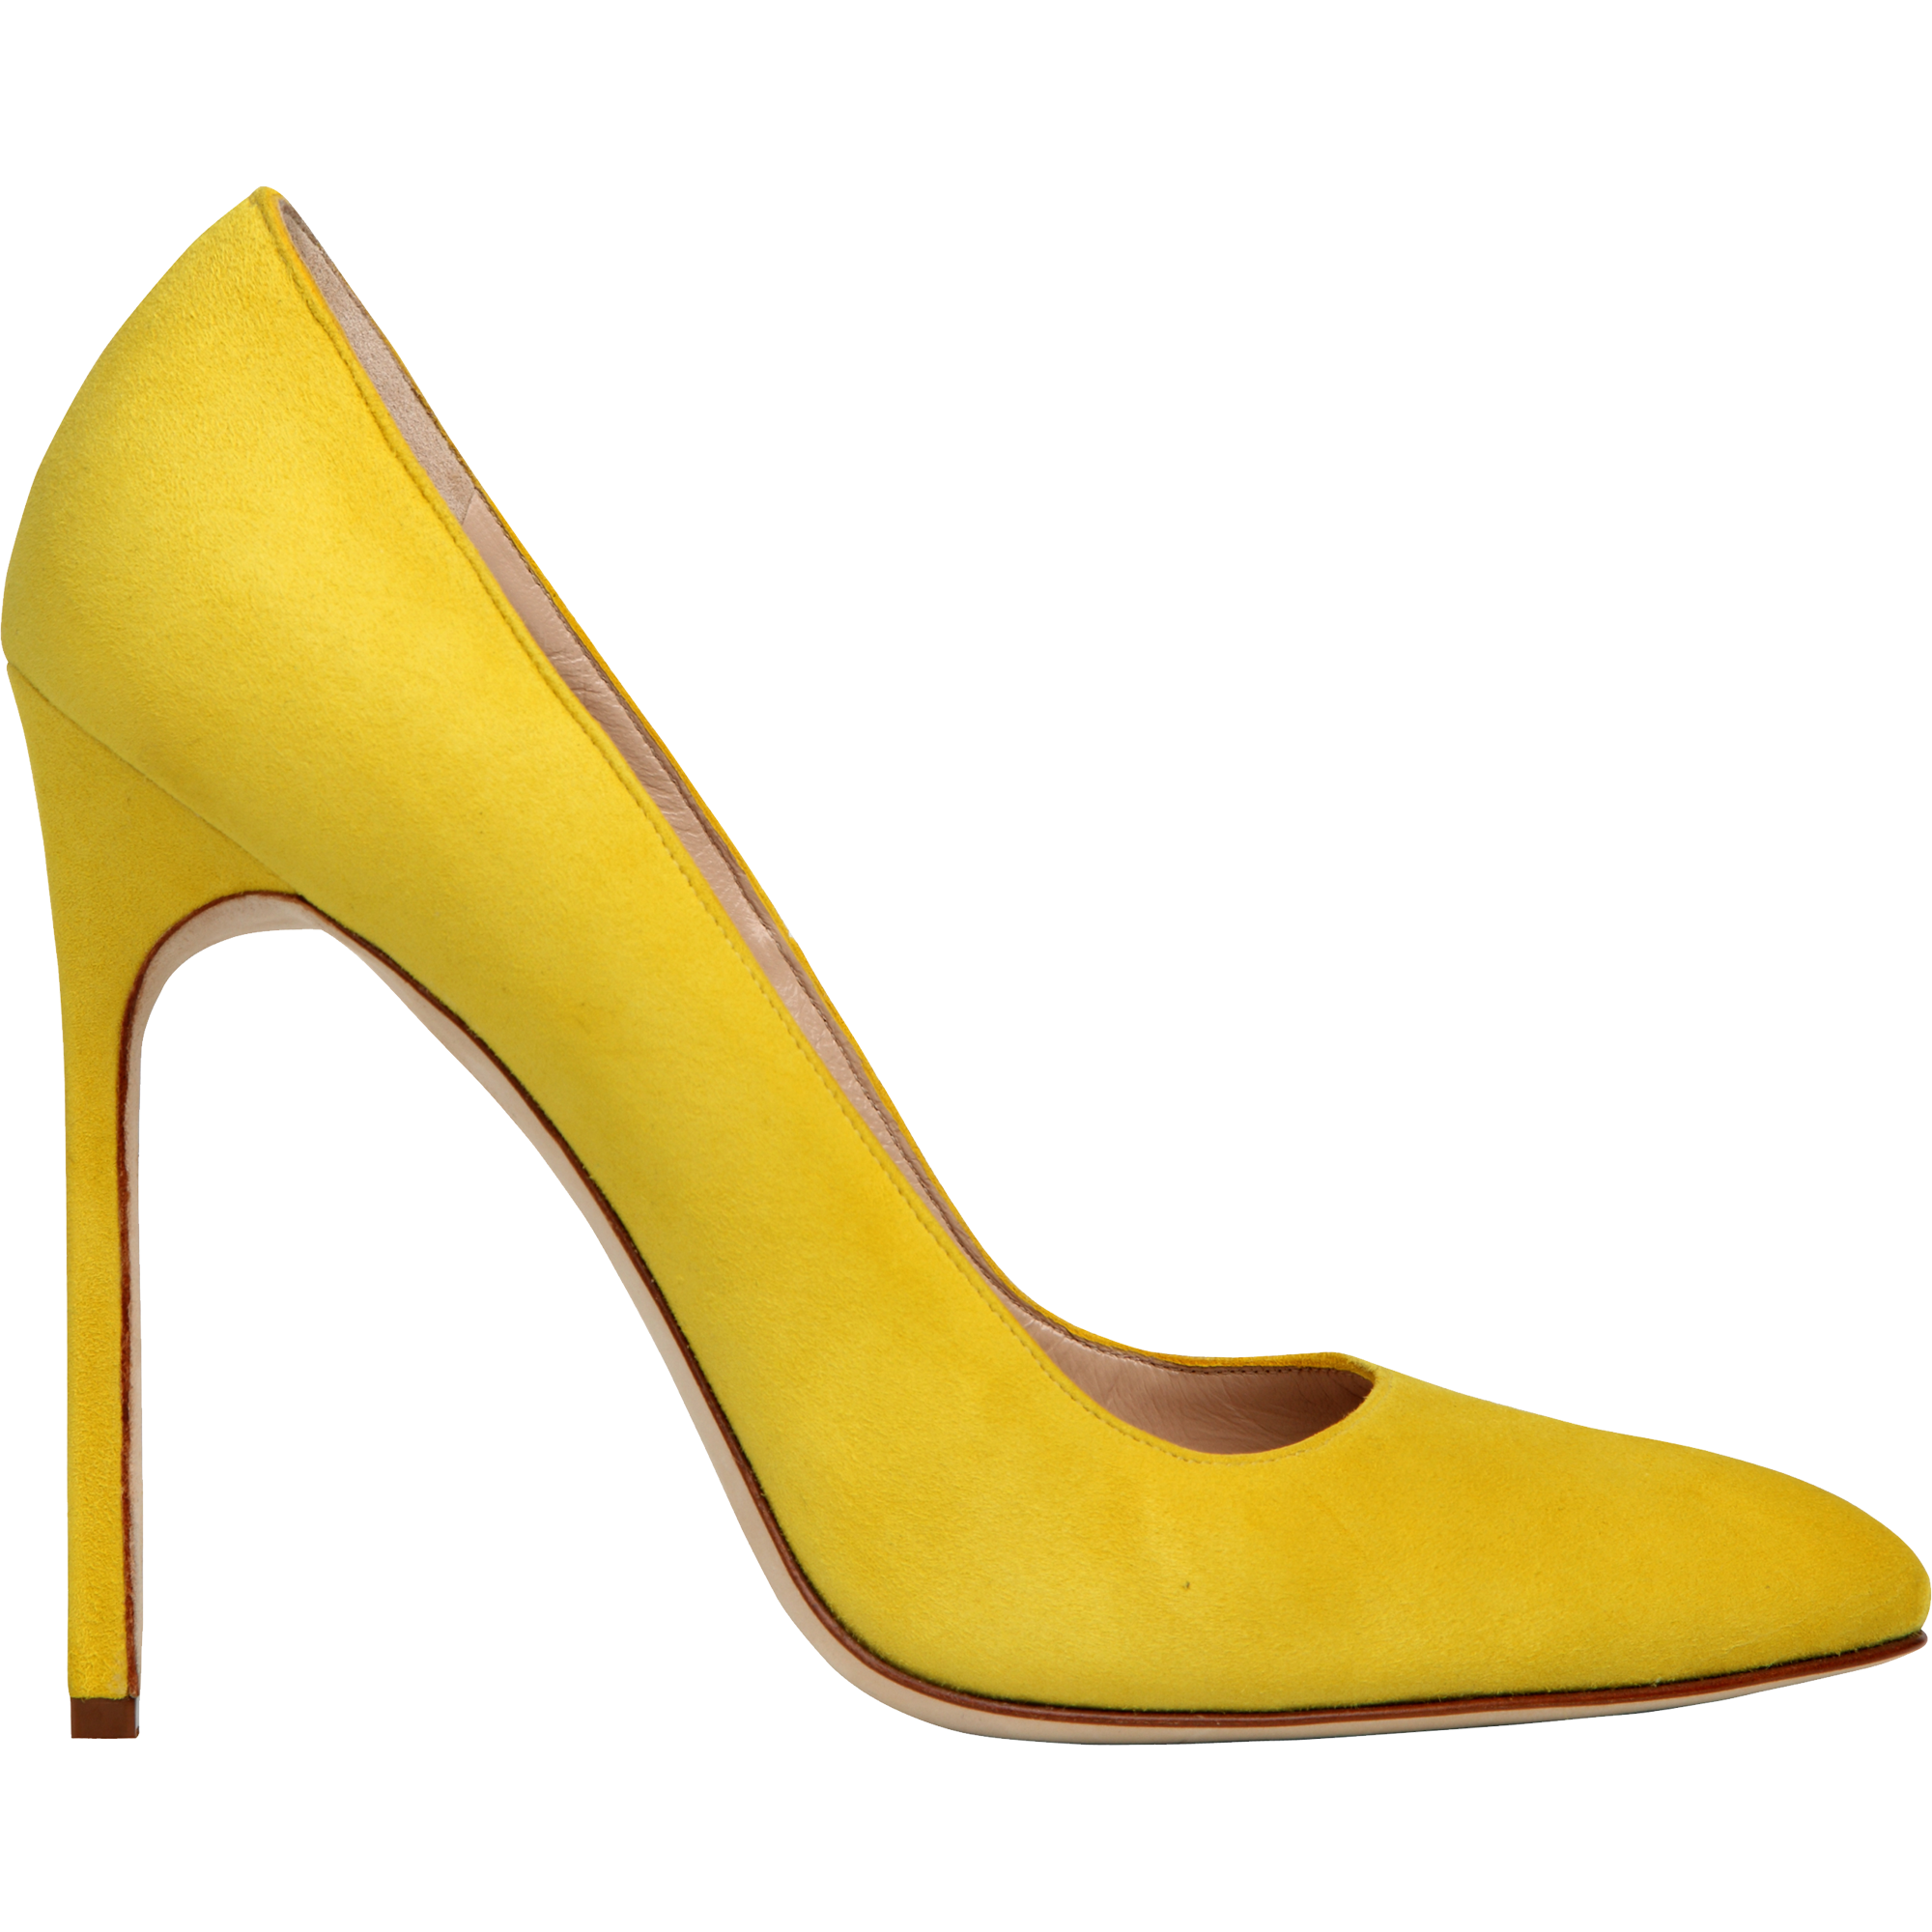 Yellow Women Shoes Transparent Picture